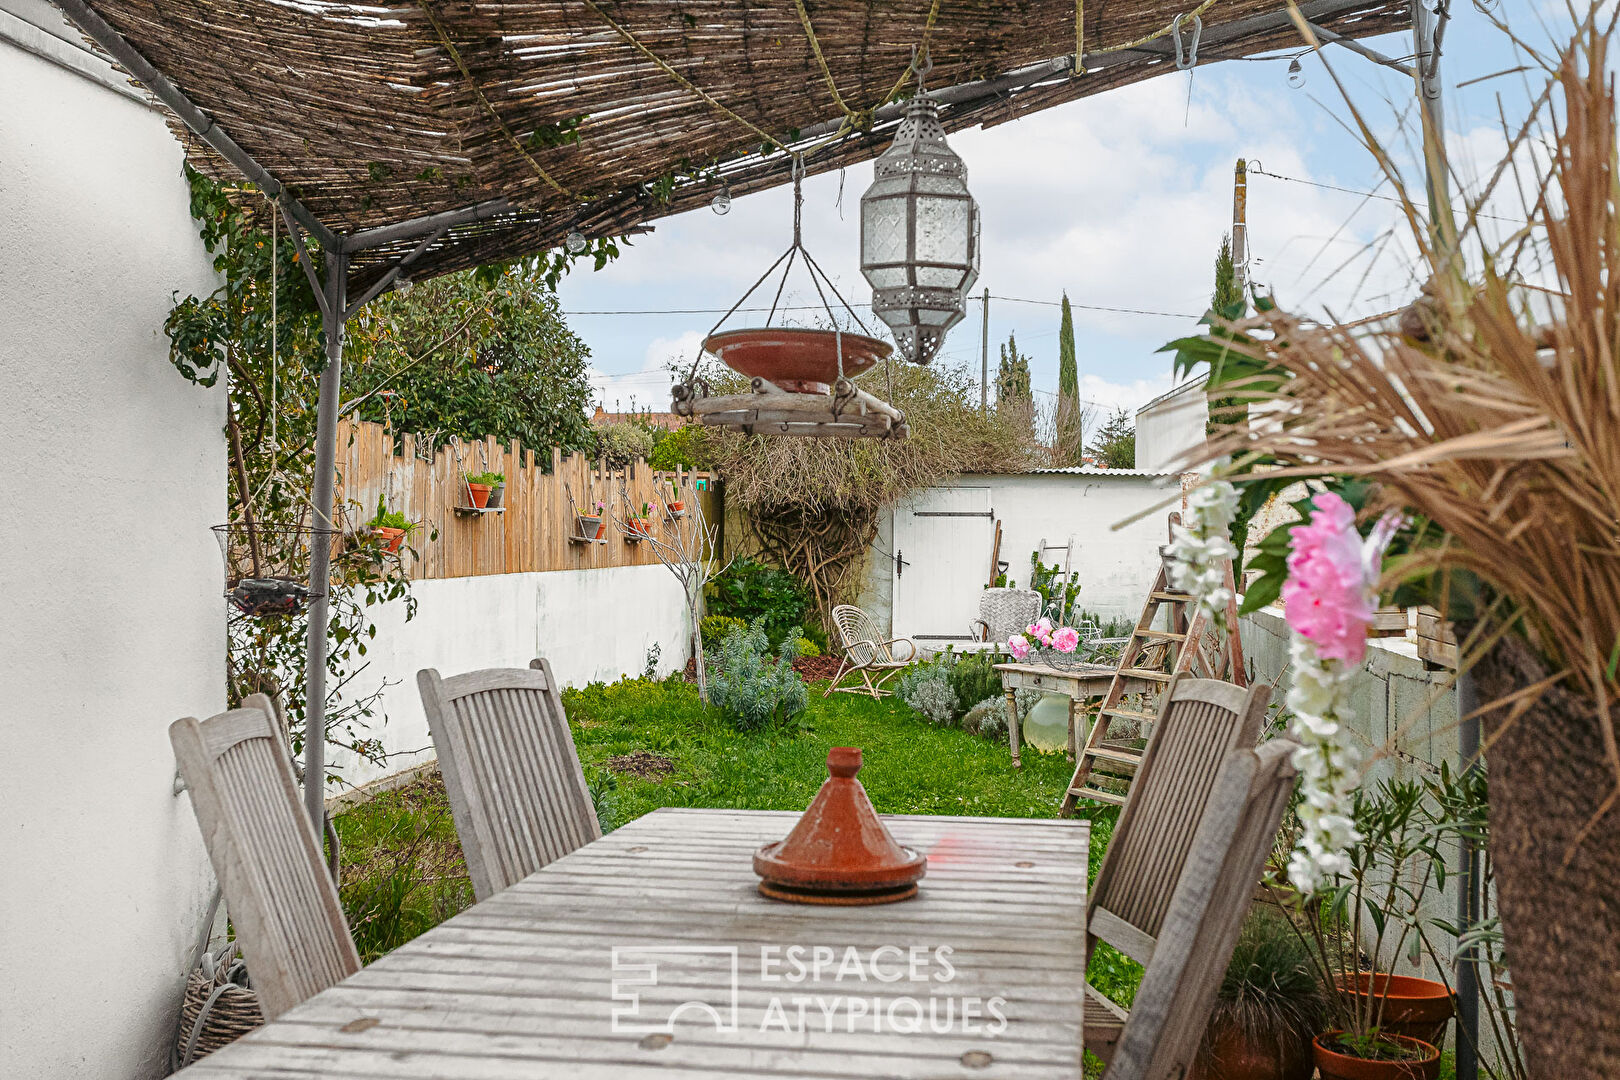 Shop with a bohemian spirit and its enclosed garden